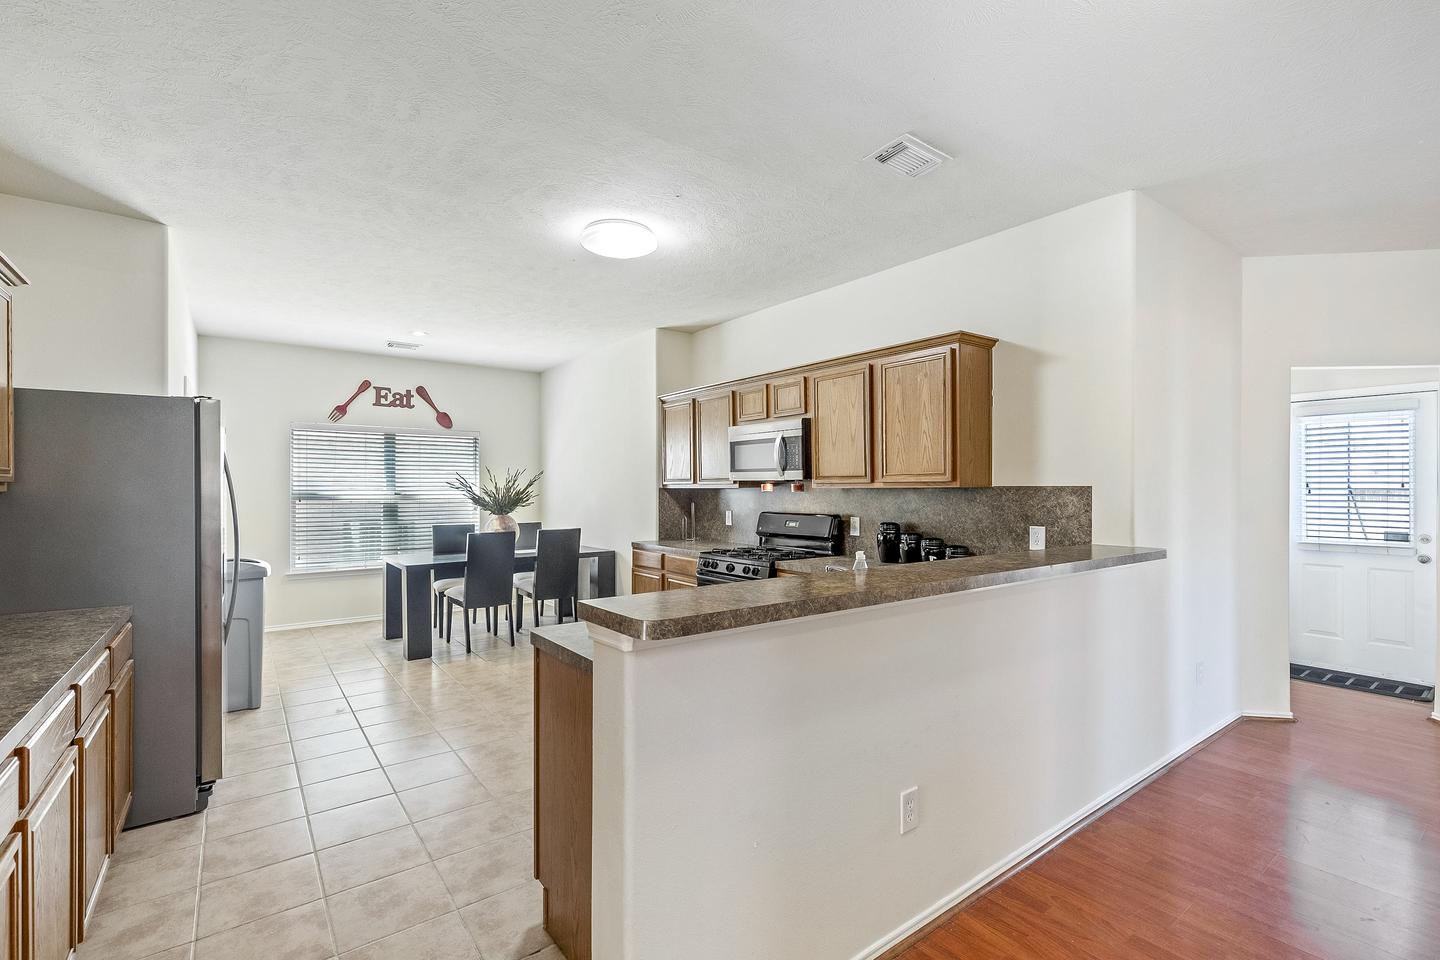 Enjoy some grub in this gorgeous and spacious open concept kitchen with gas stove and stainless steel refrigerator!